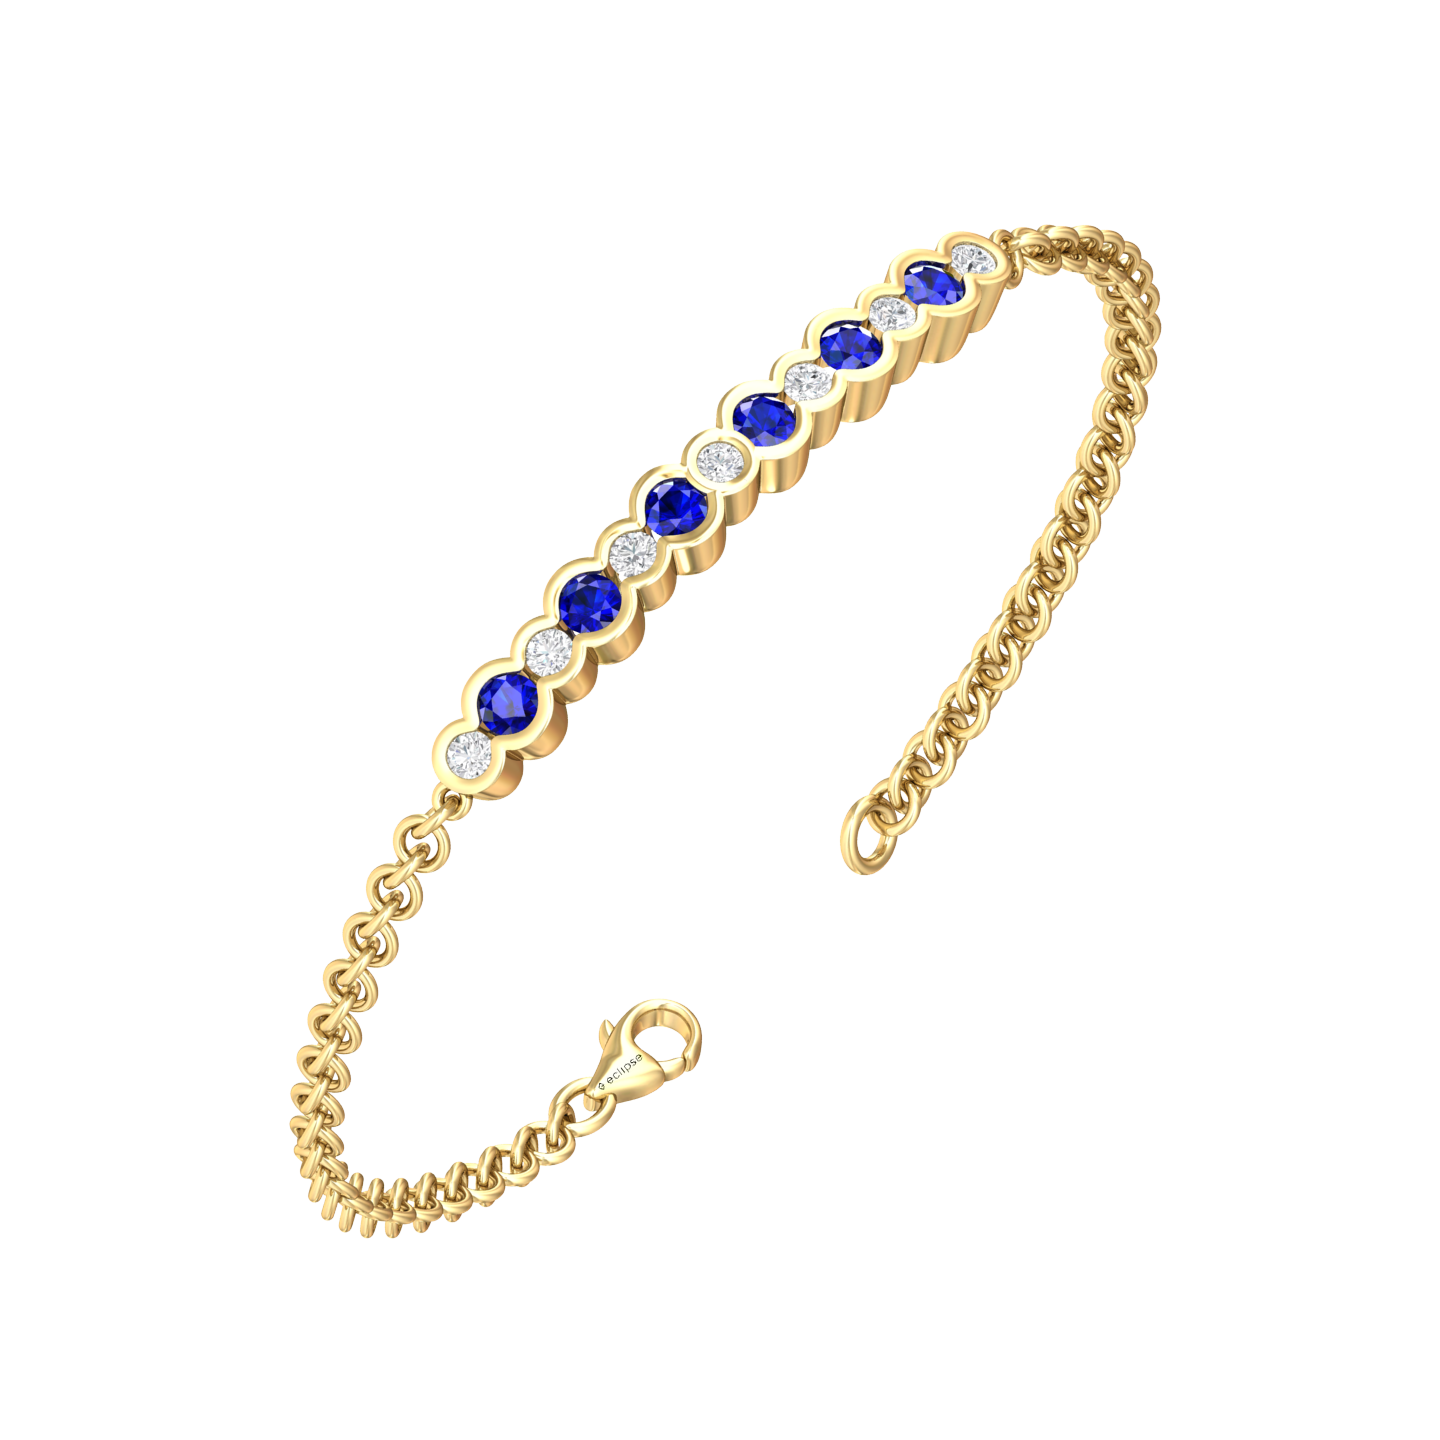 Eclipse Collection Sapphire and Diamond Bracelet  Gardiner Brothers 18ct Yellow Gold  